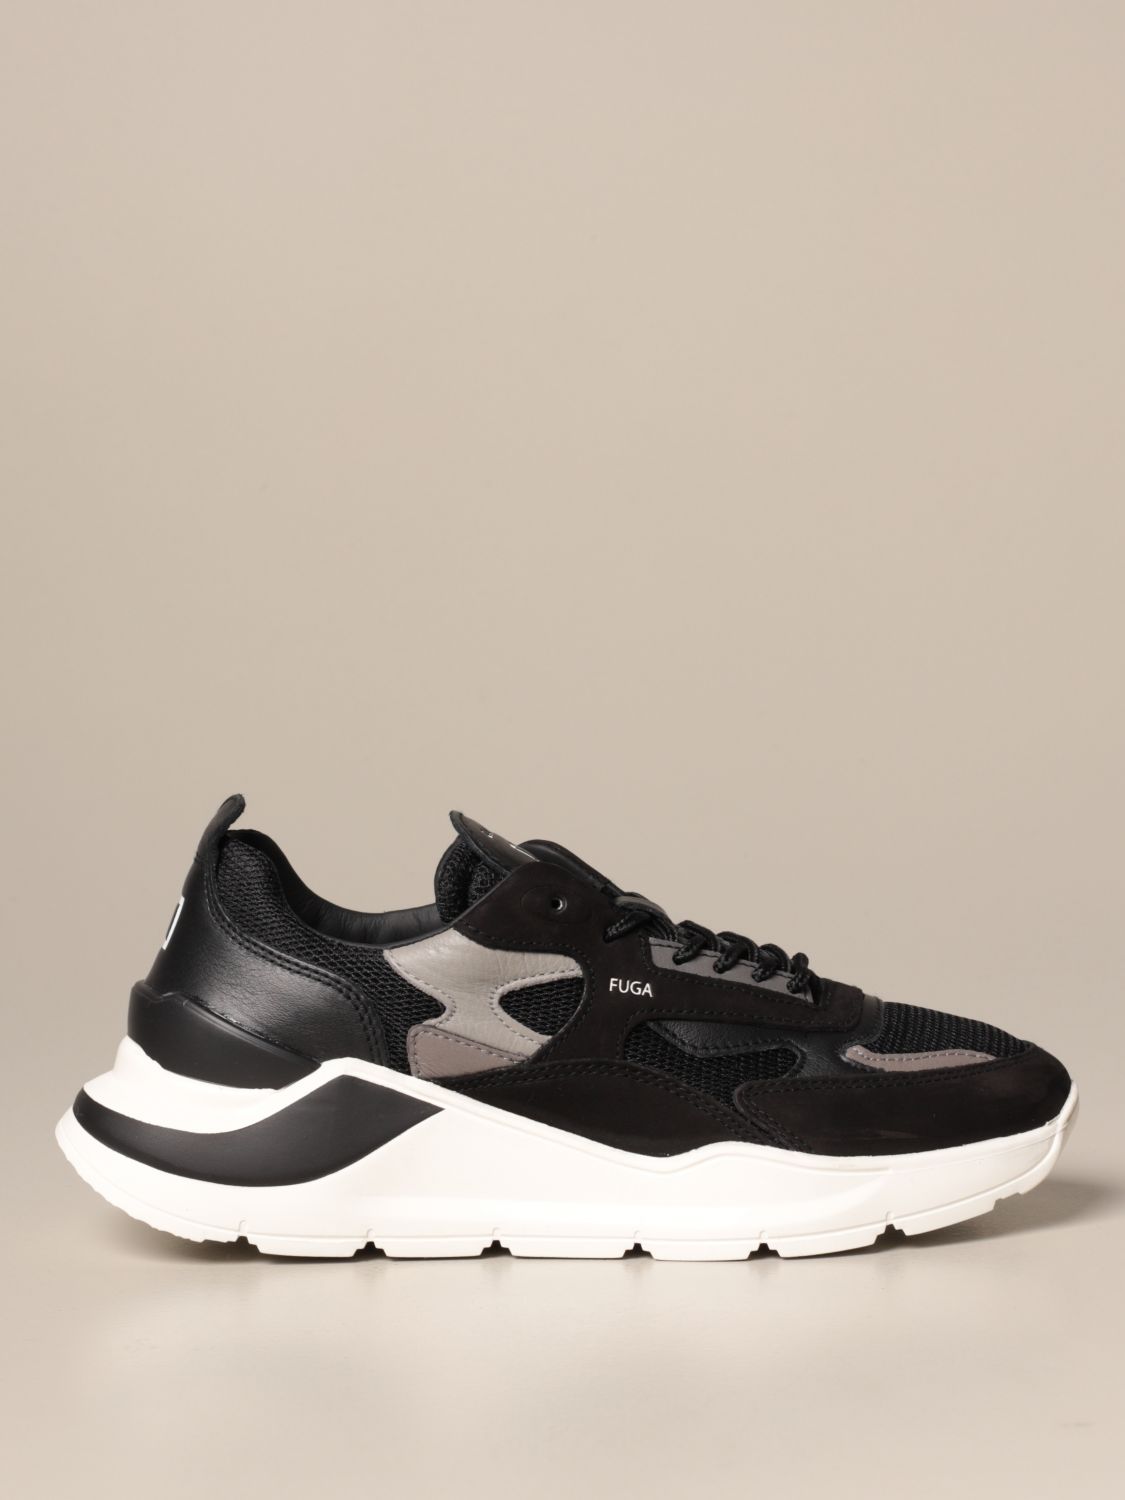 klodset Færøerne Udlevering D.A.T.E.: Sneakers Fuga Mesh in leather and suede - Black | D.a.t.e.  sneakers M331-FG-ME online on GIGLIO.COM